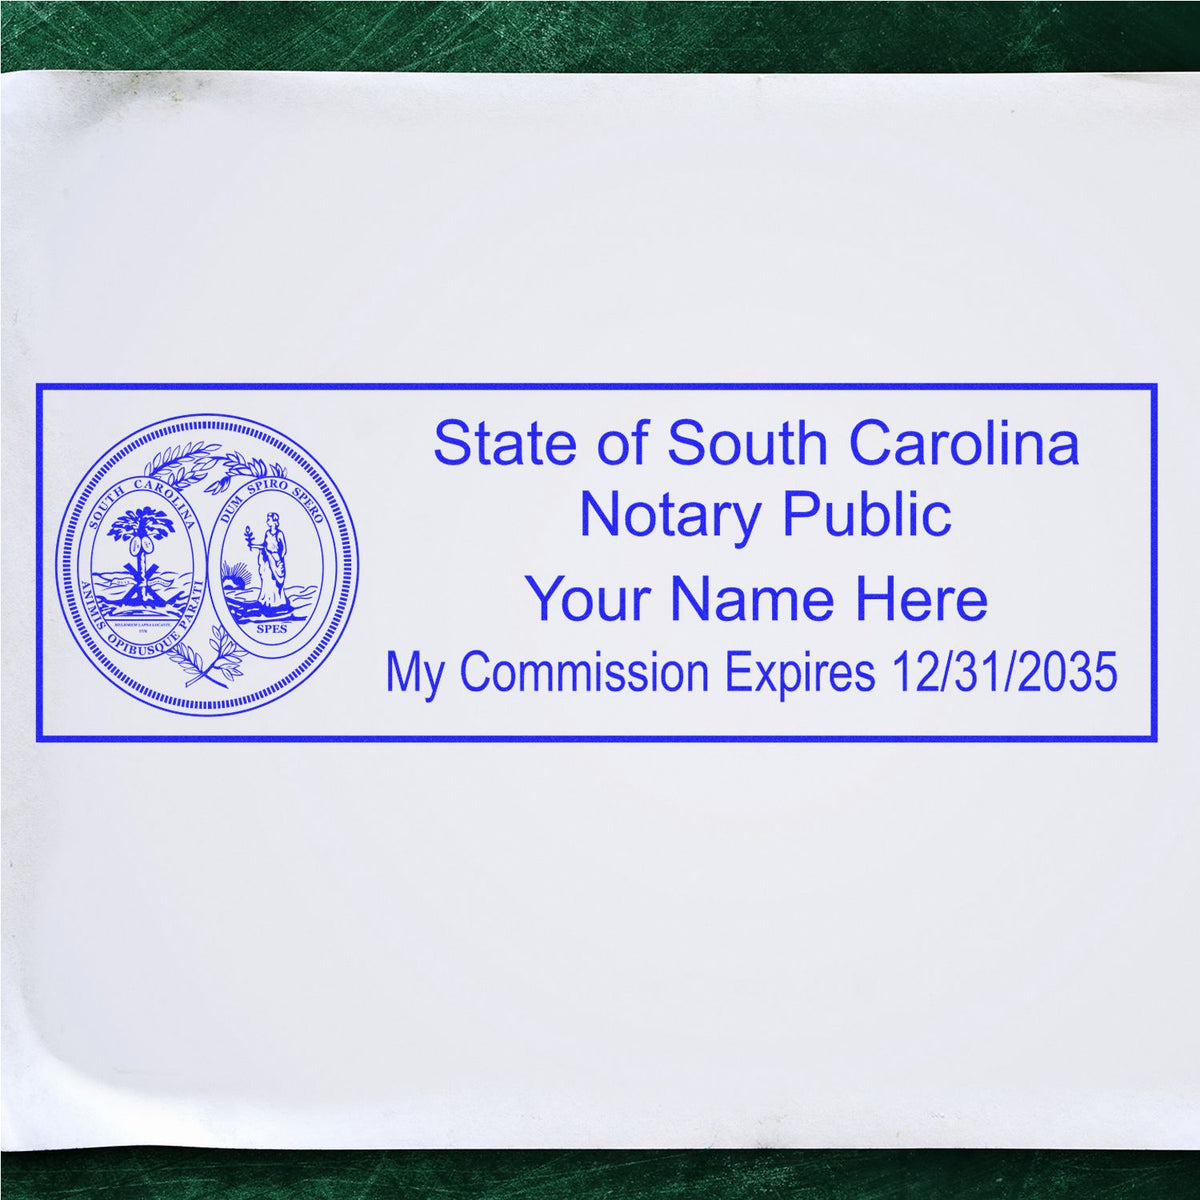 The PSI South Carolina Notary Stamp stamp impression comes to life with a crisp, detailed photo on paper - showcasing true professional quality.